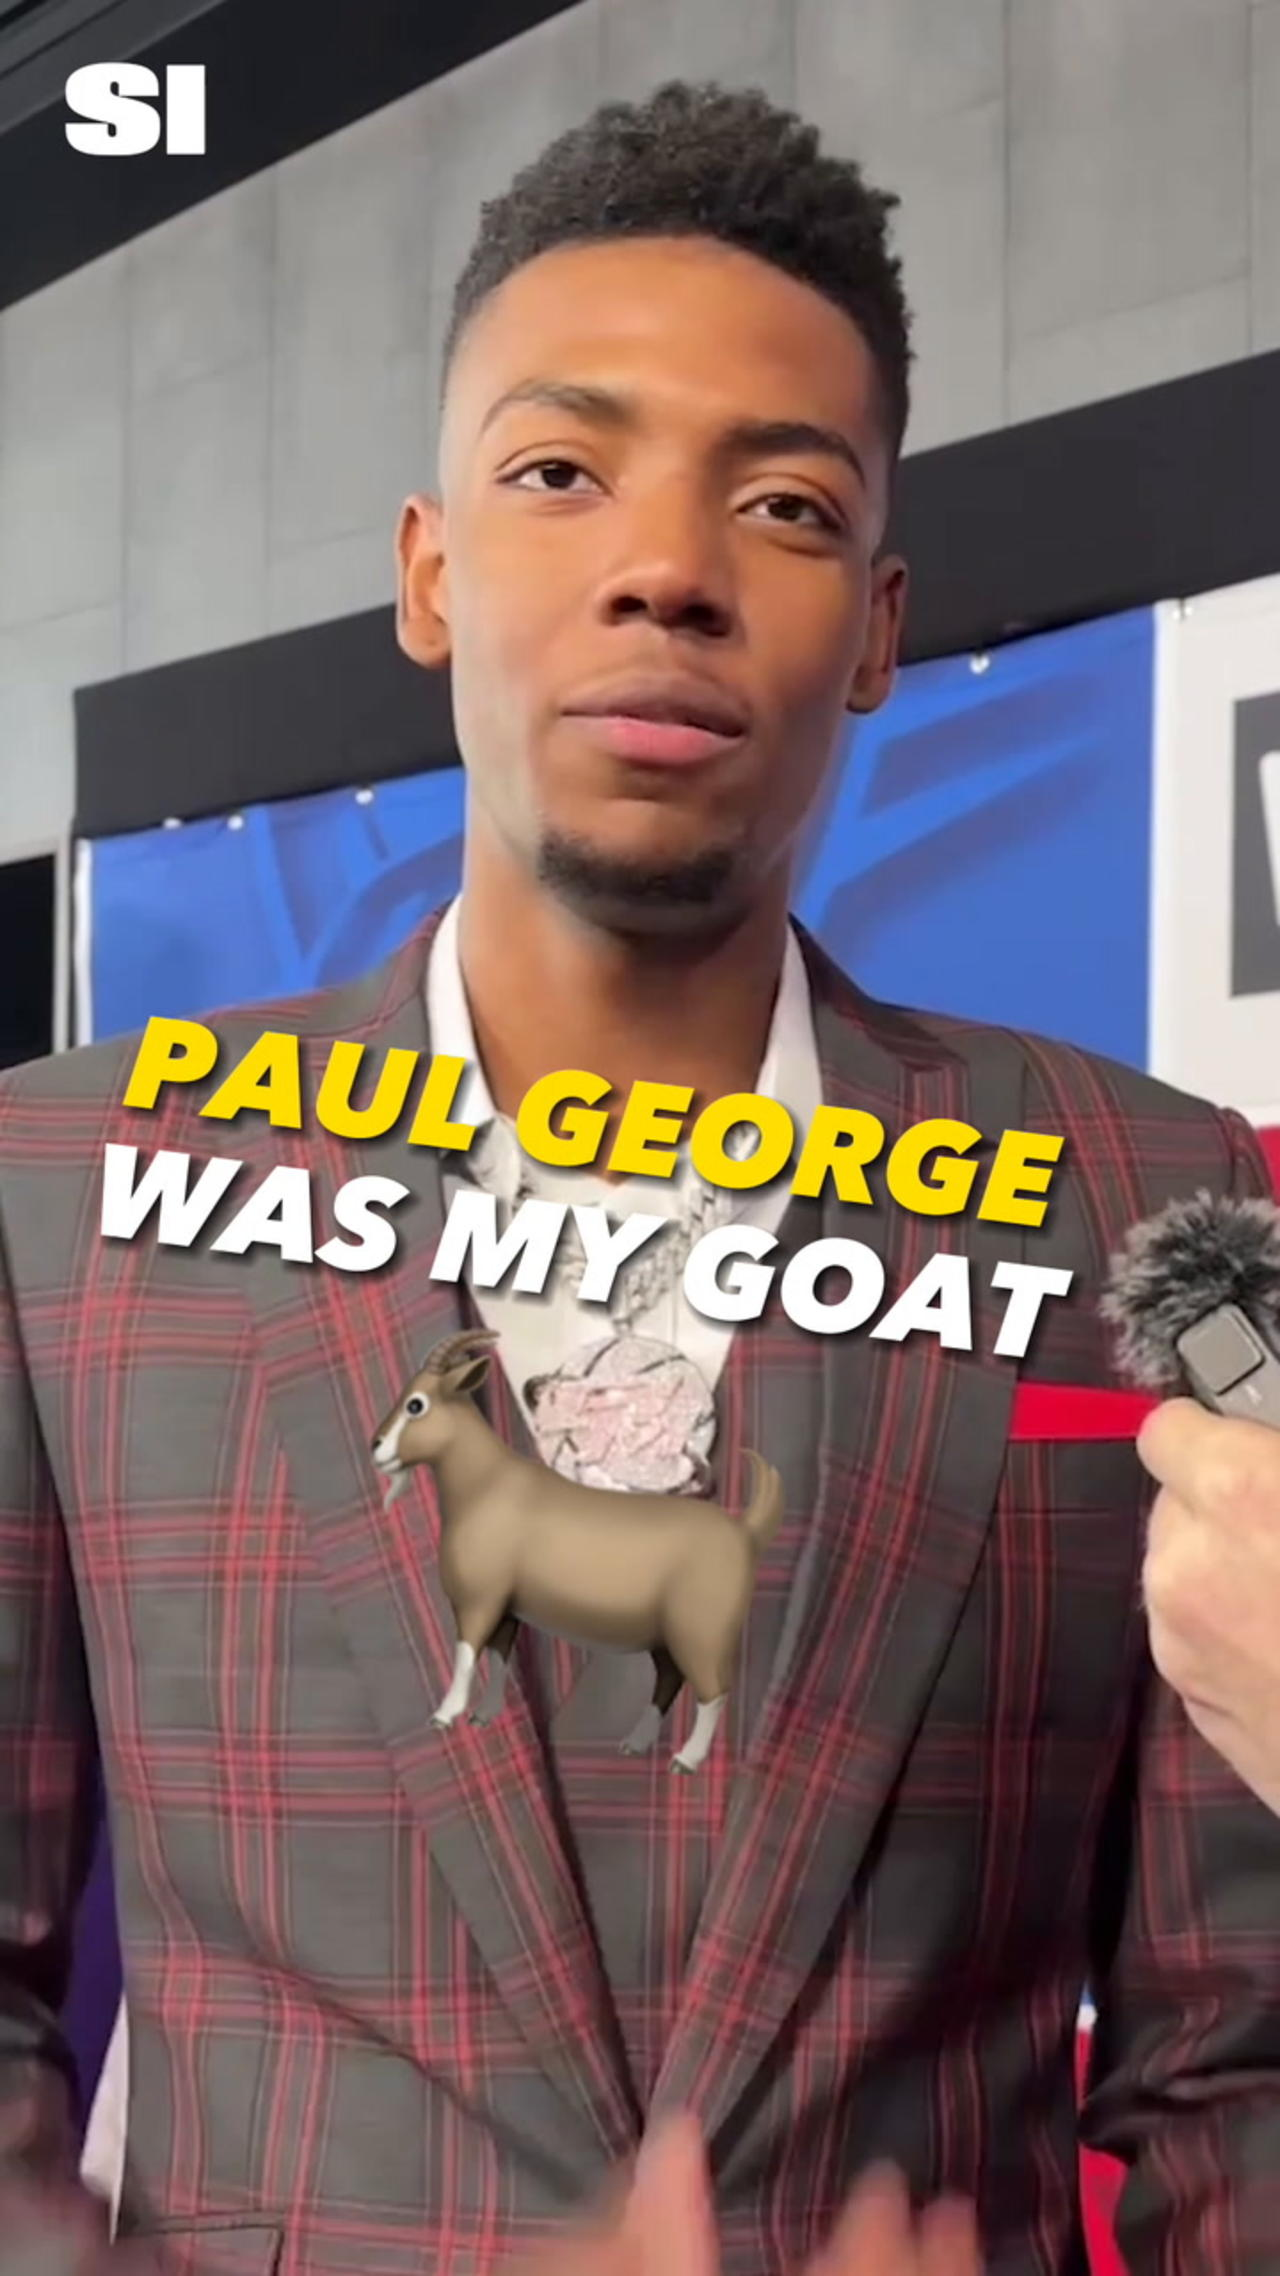 Brandon Miller Clarifies His Stance on Paul George Being the GOAT